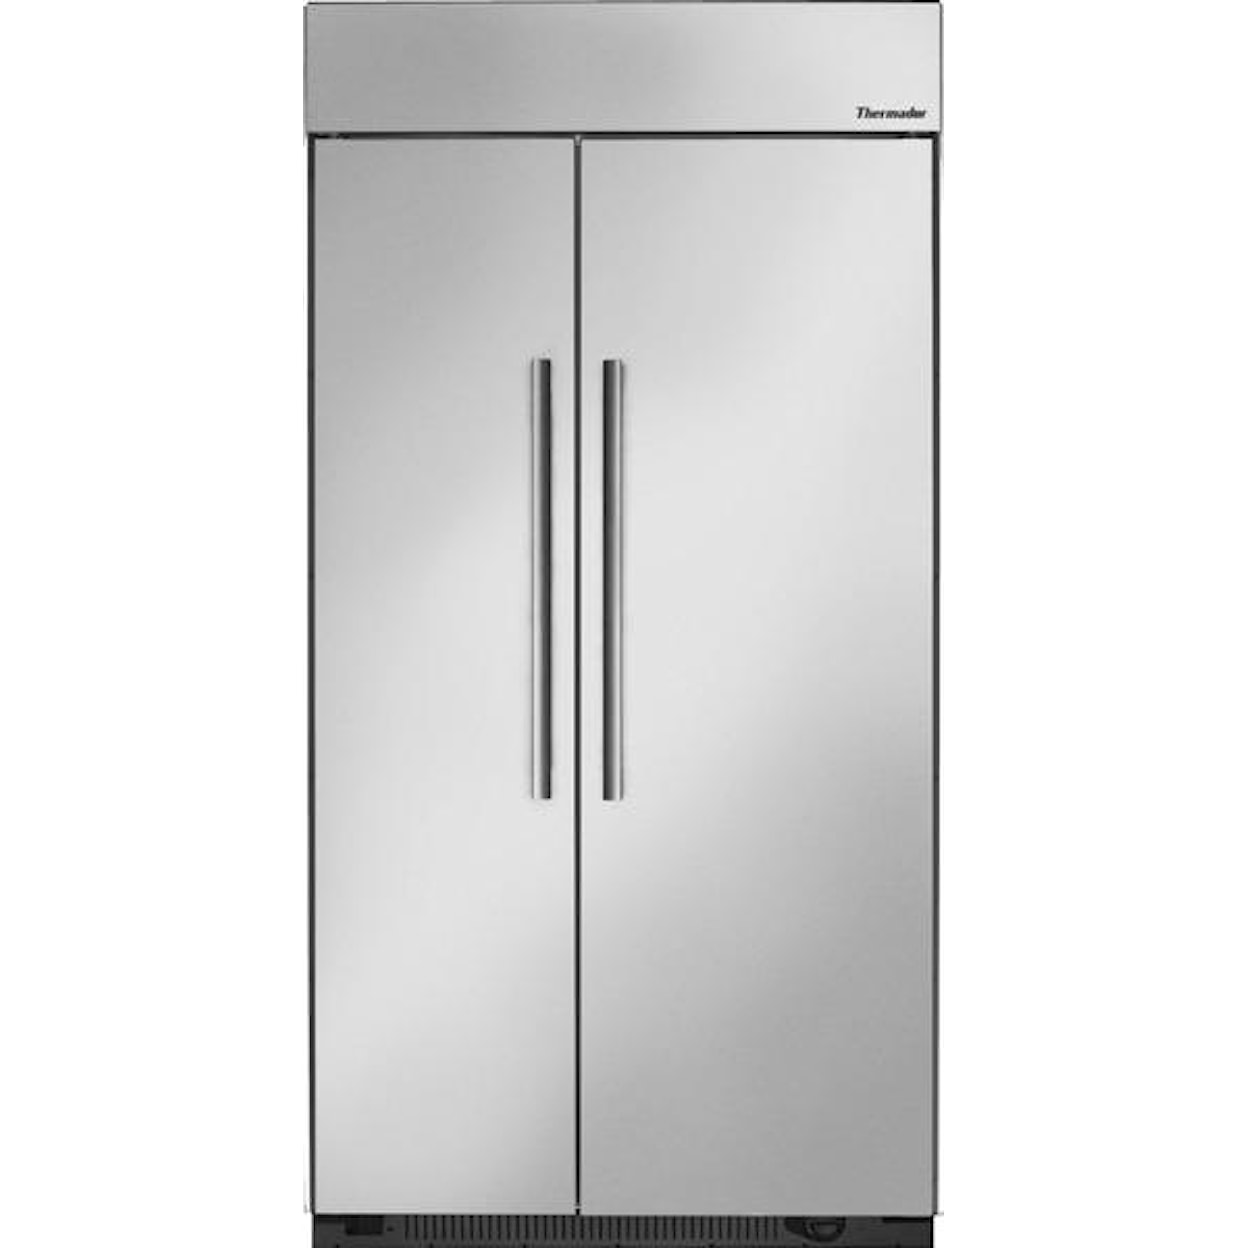 Thermador Side-By-Side Refrigerators - Thermador 42" Built-In Side-By-Side Refrigerator